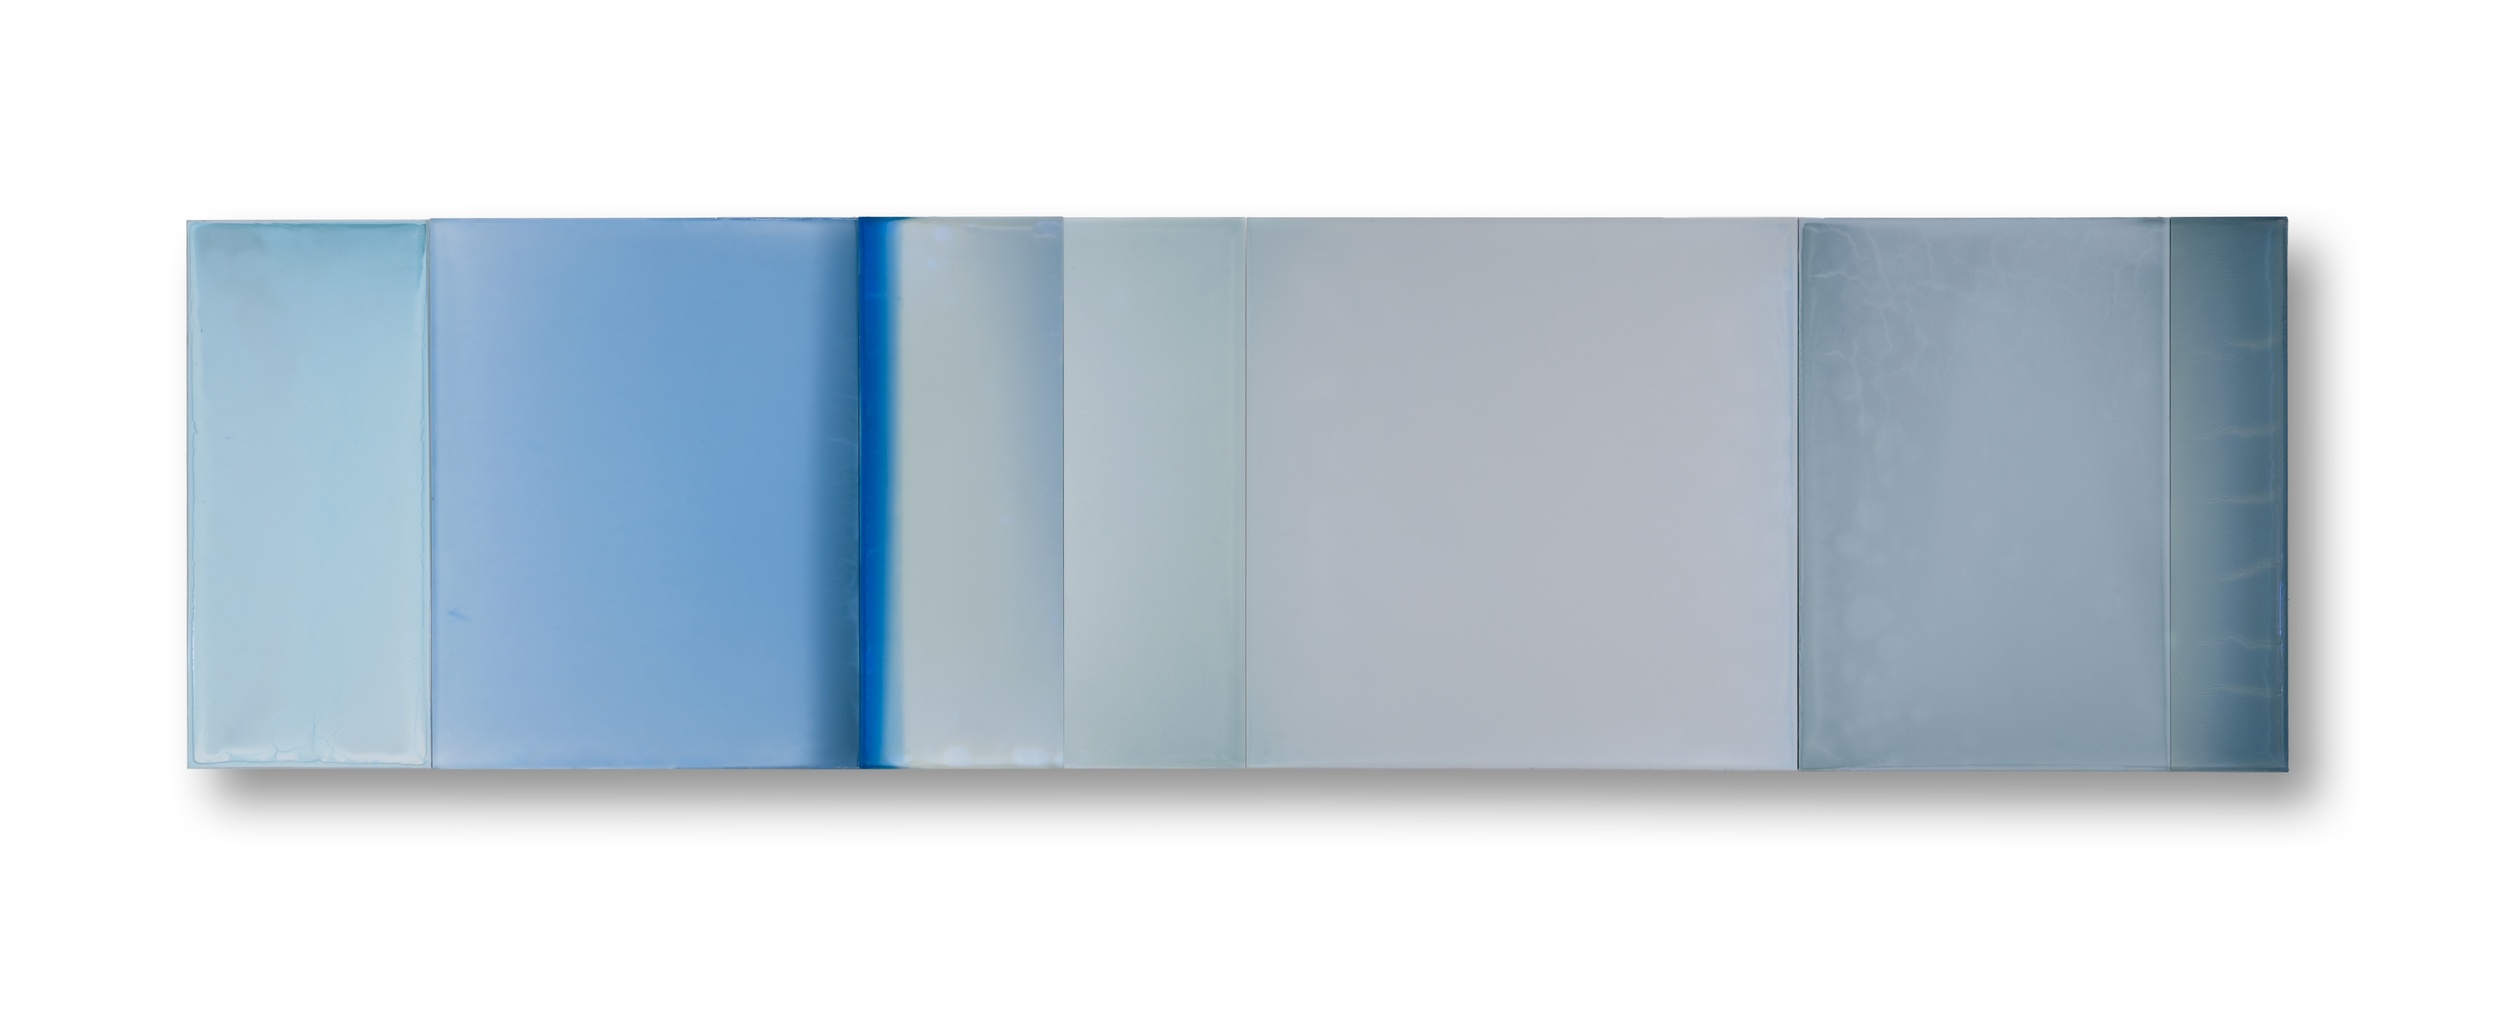   The middle is everything and everywhere  22"x 67" polymer on panel 2014 